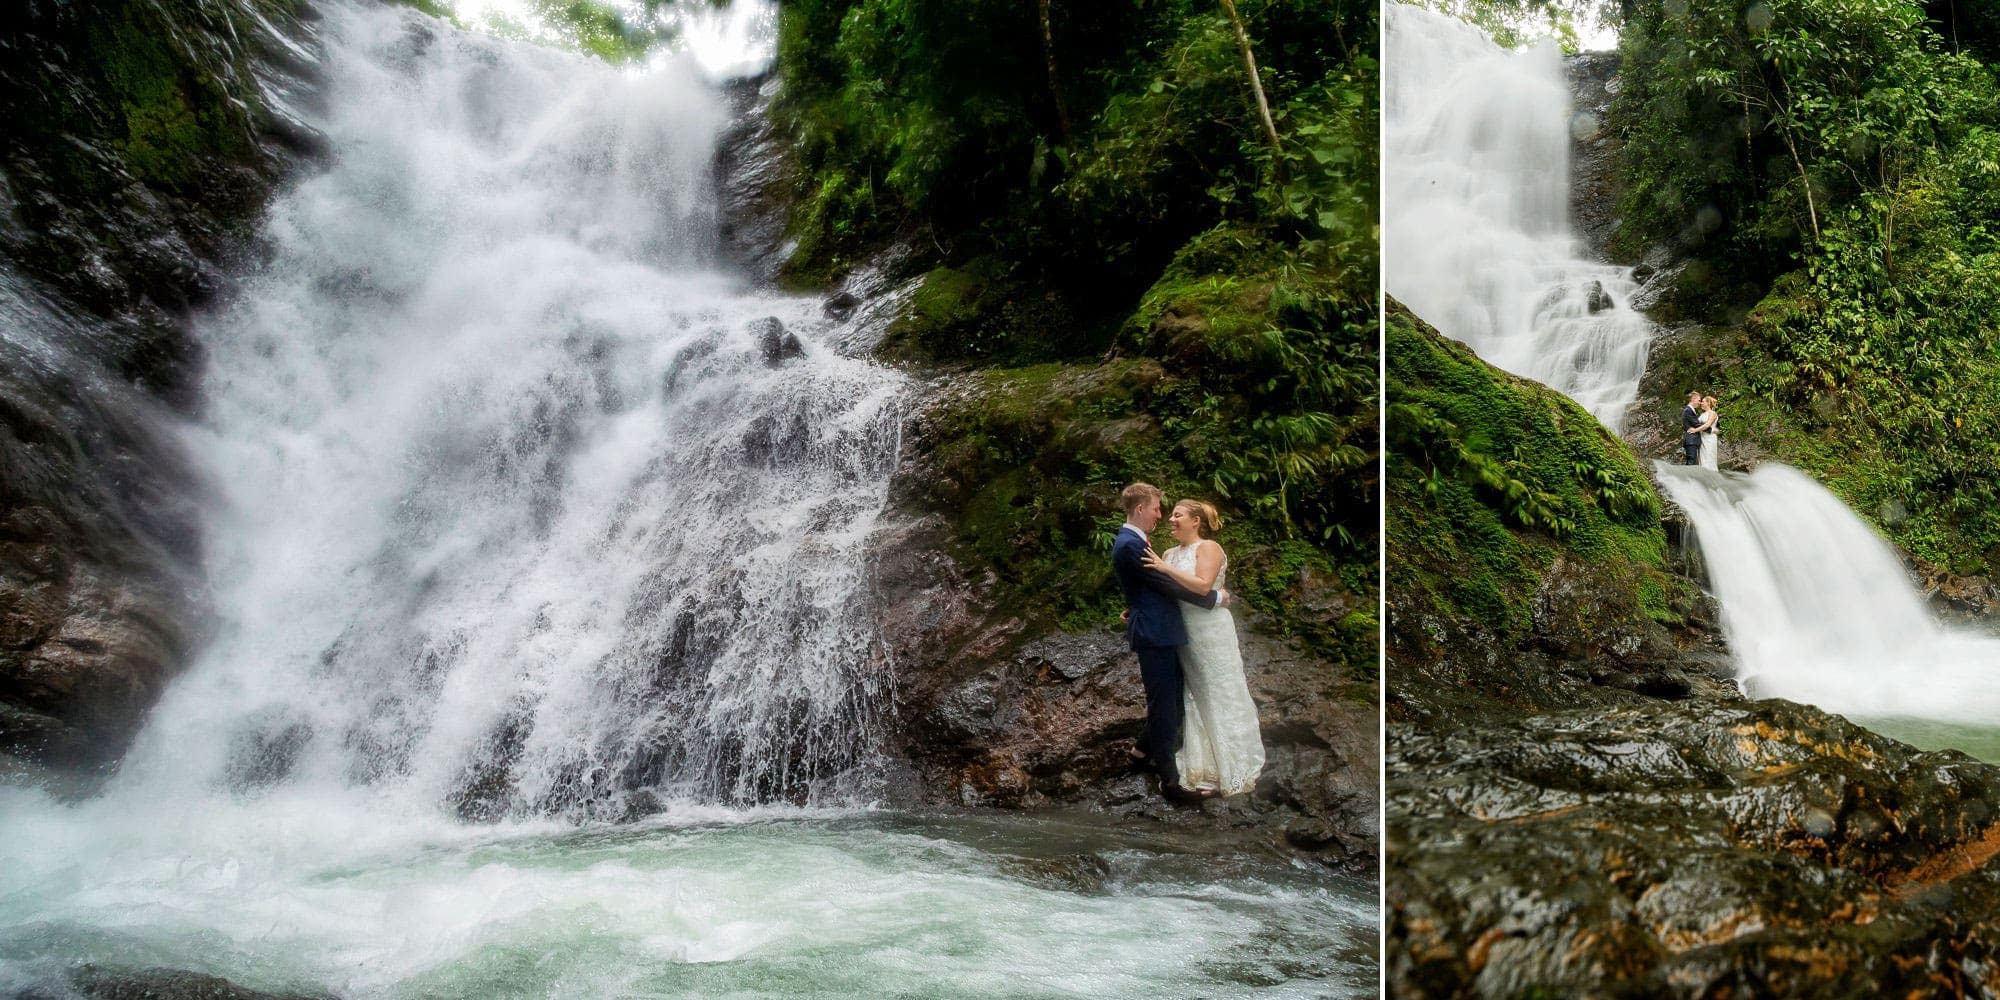 Epic photos of the couple at the waterfall